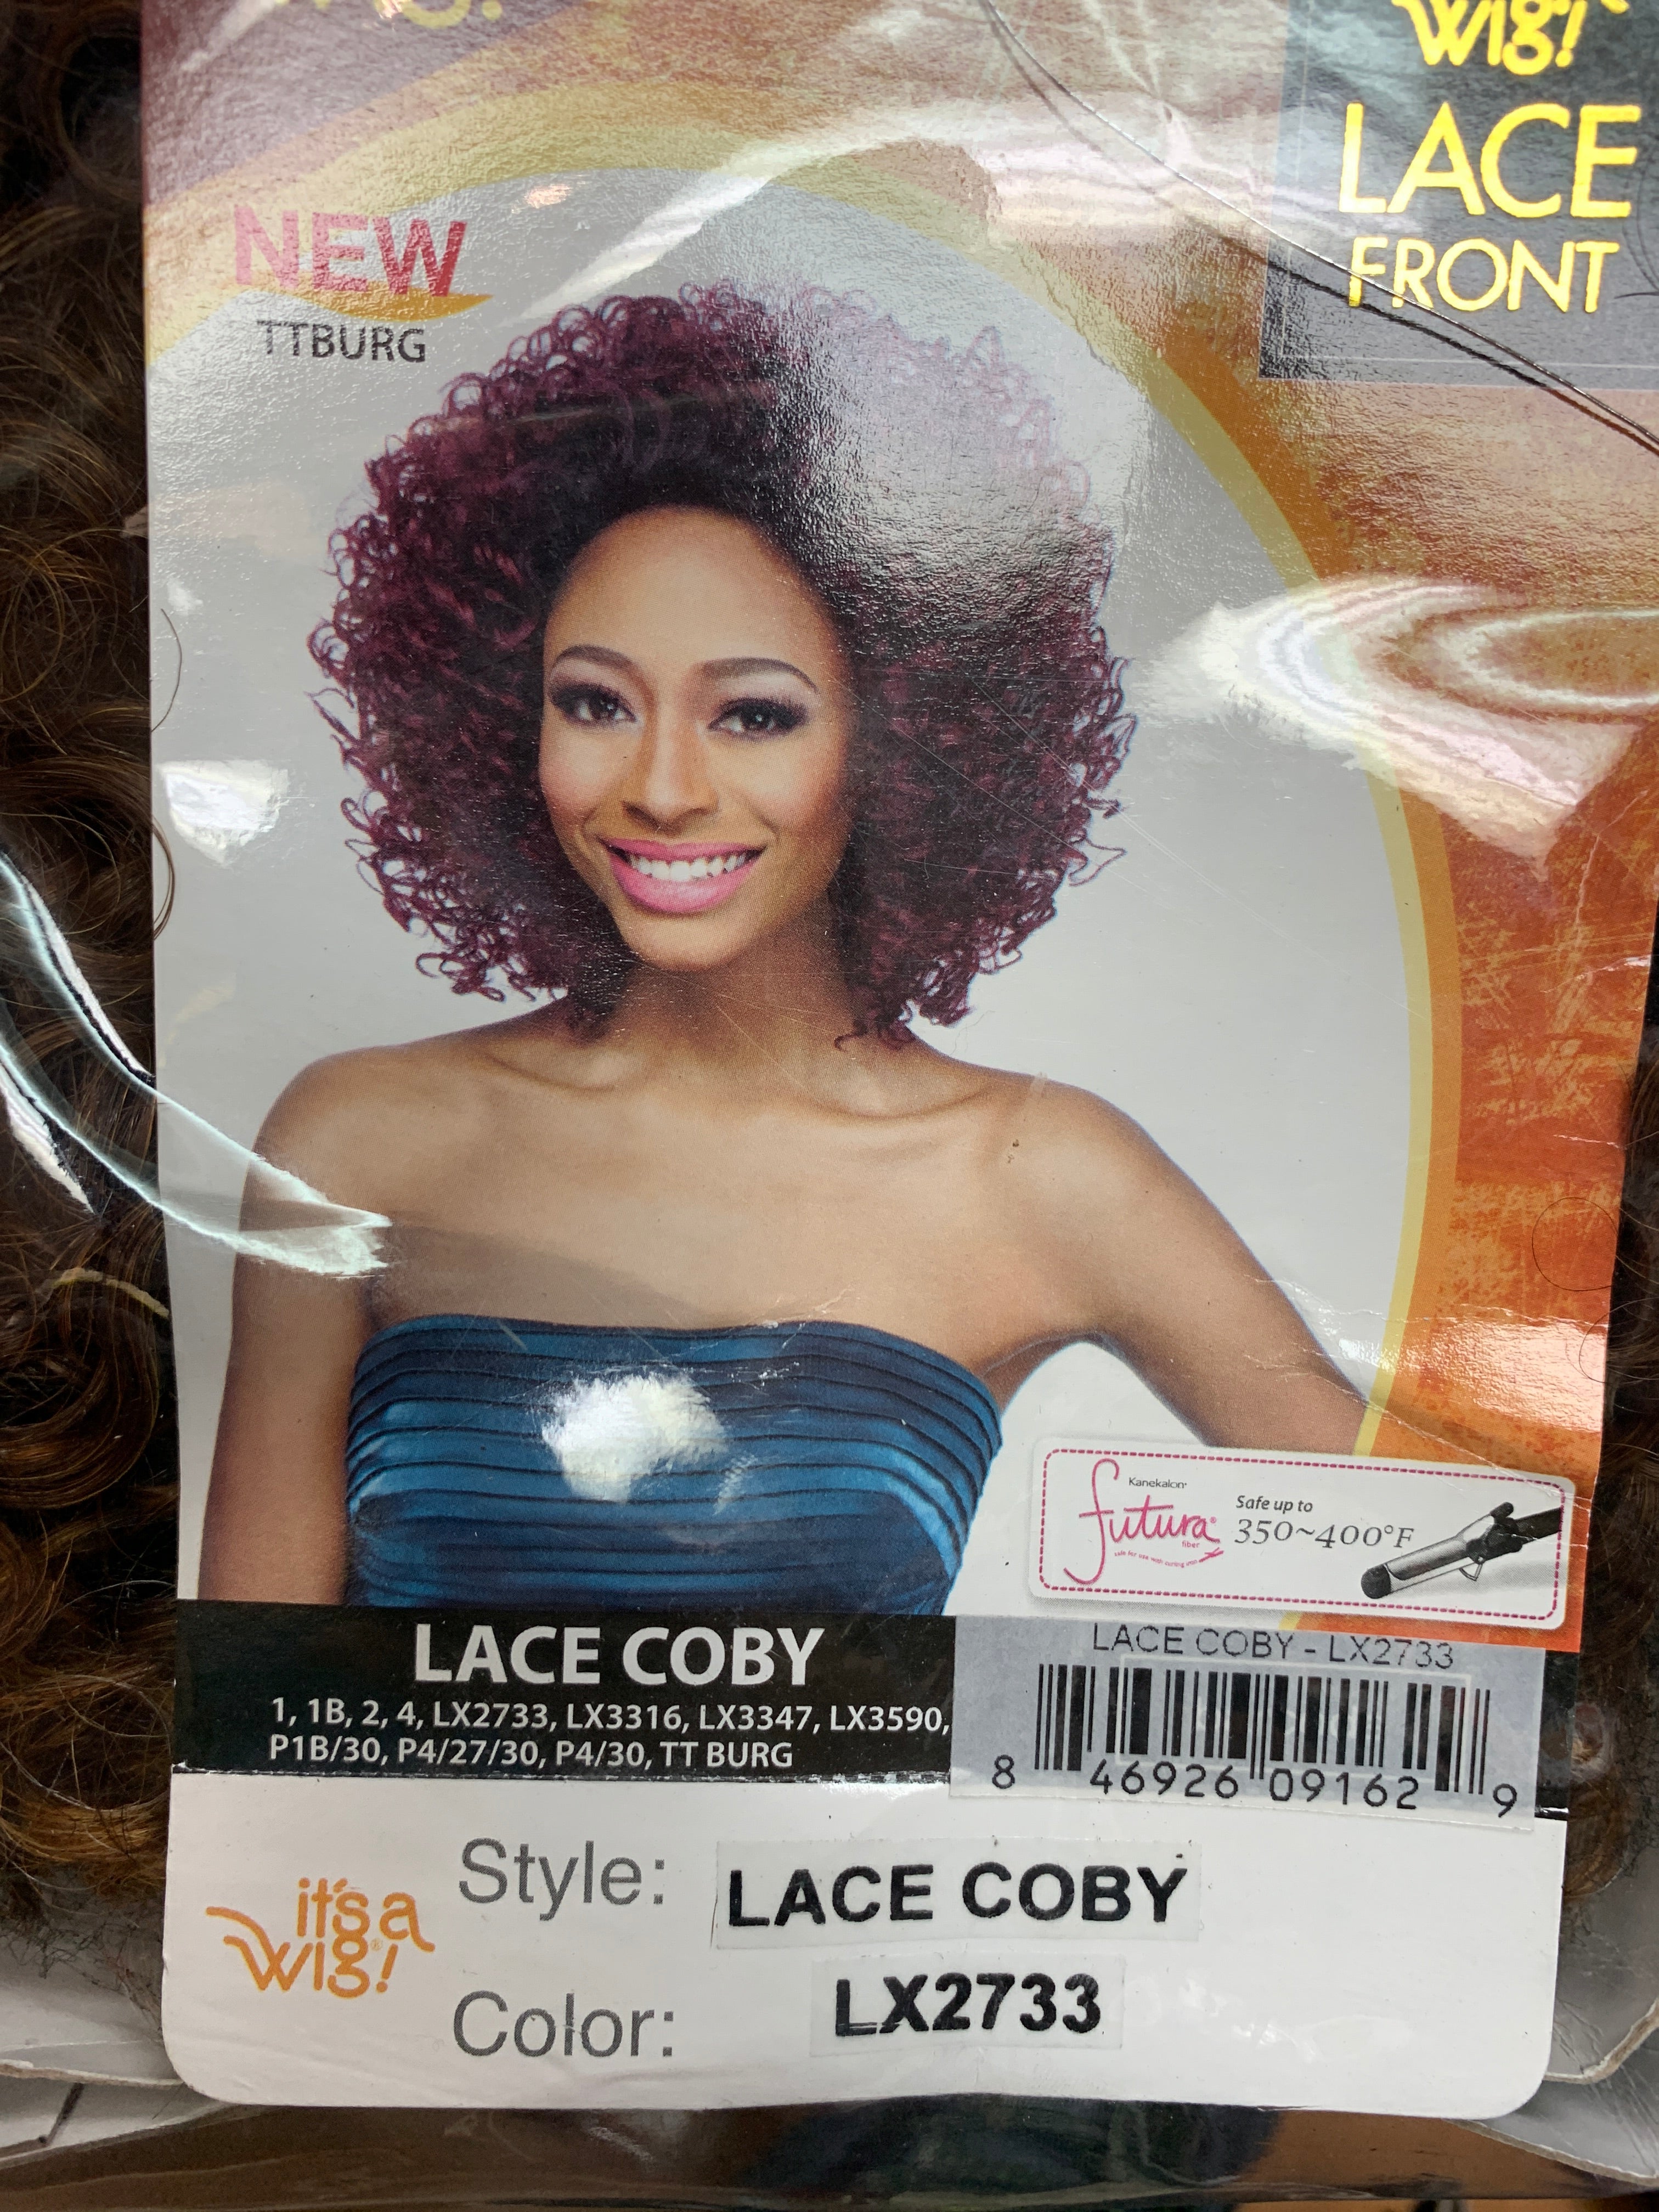 It’s a wig lace coby